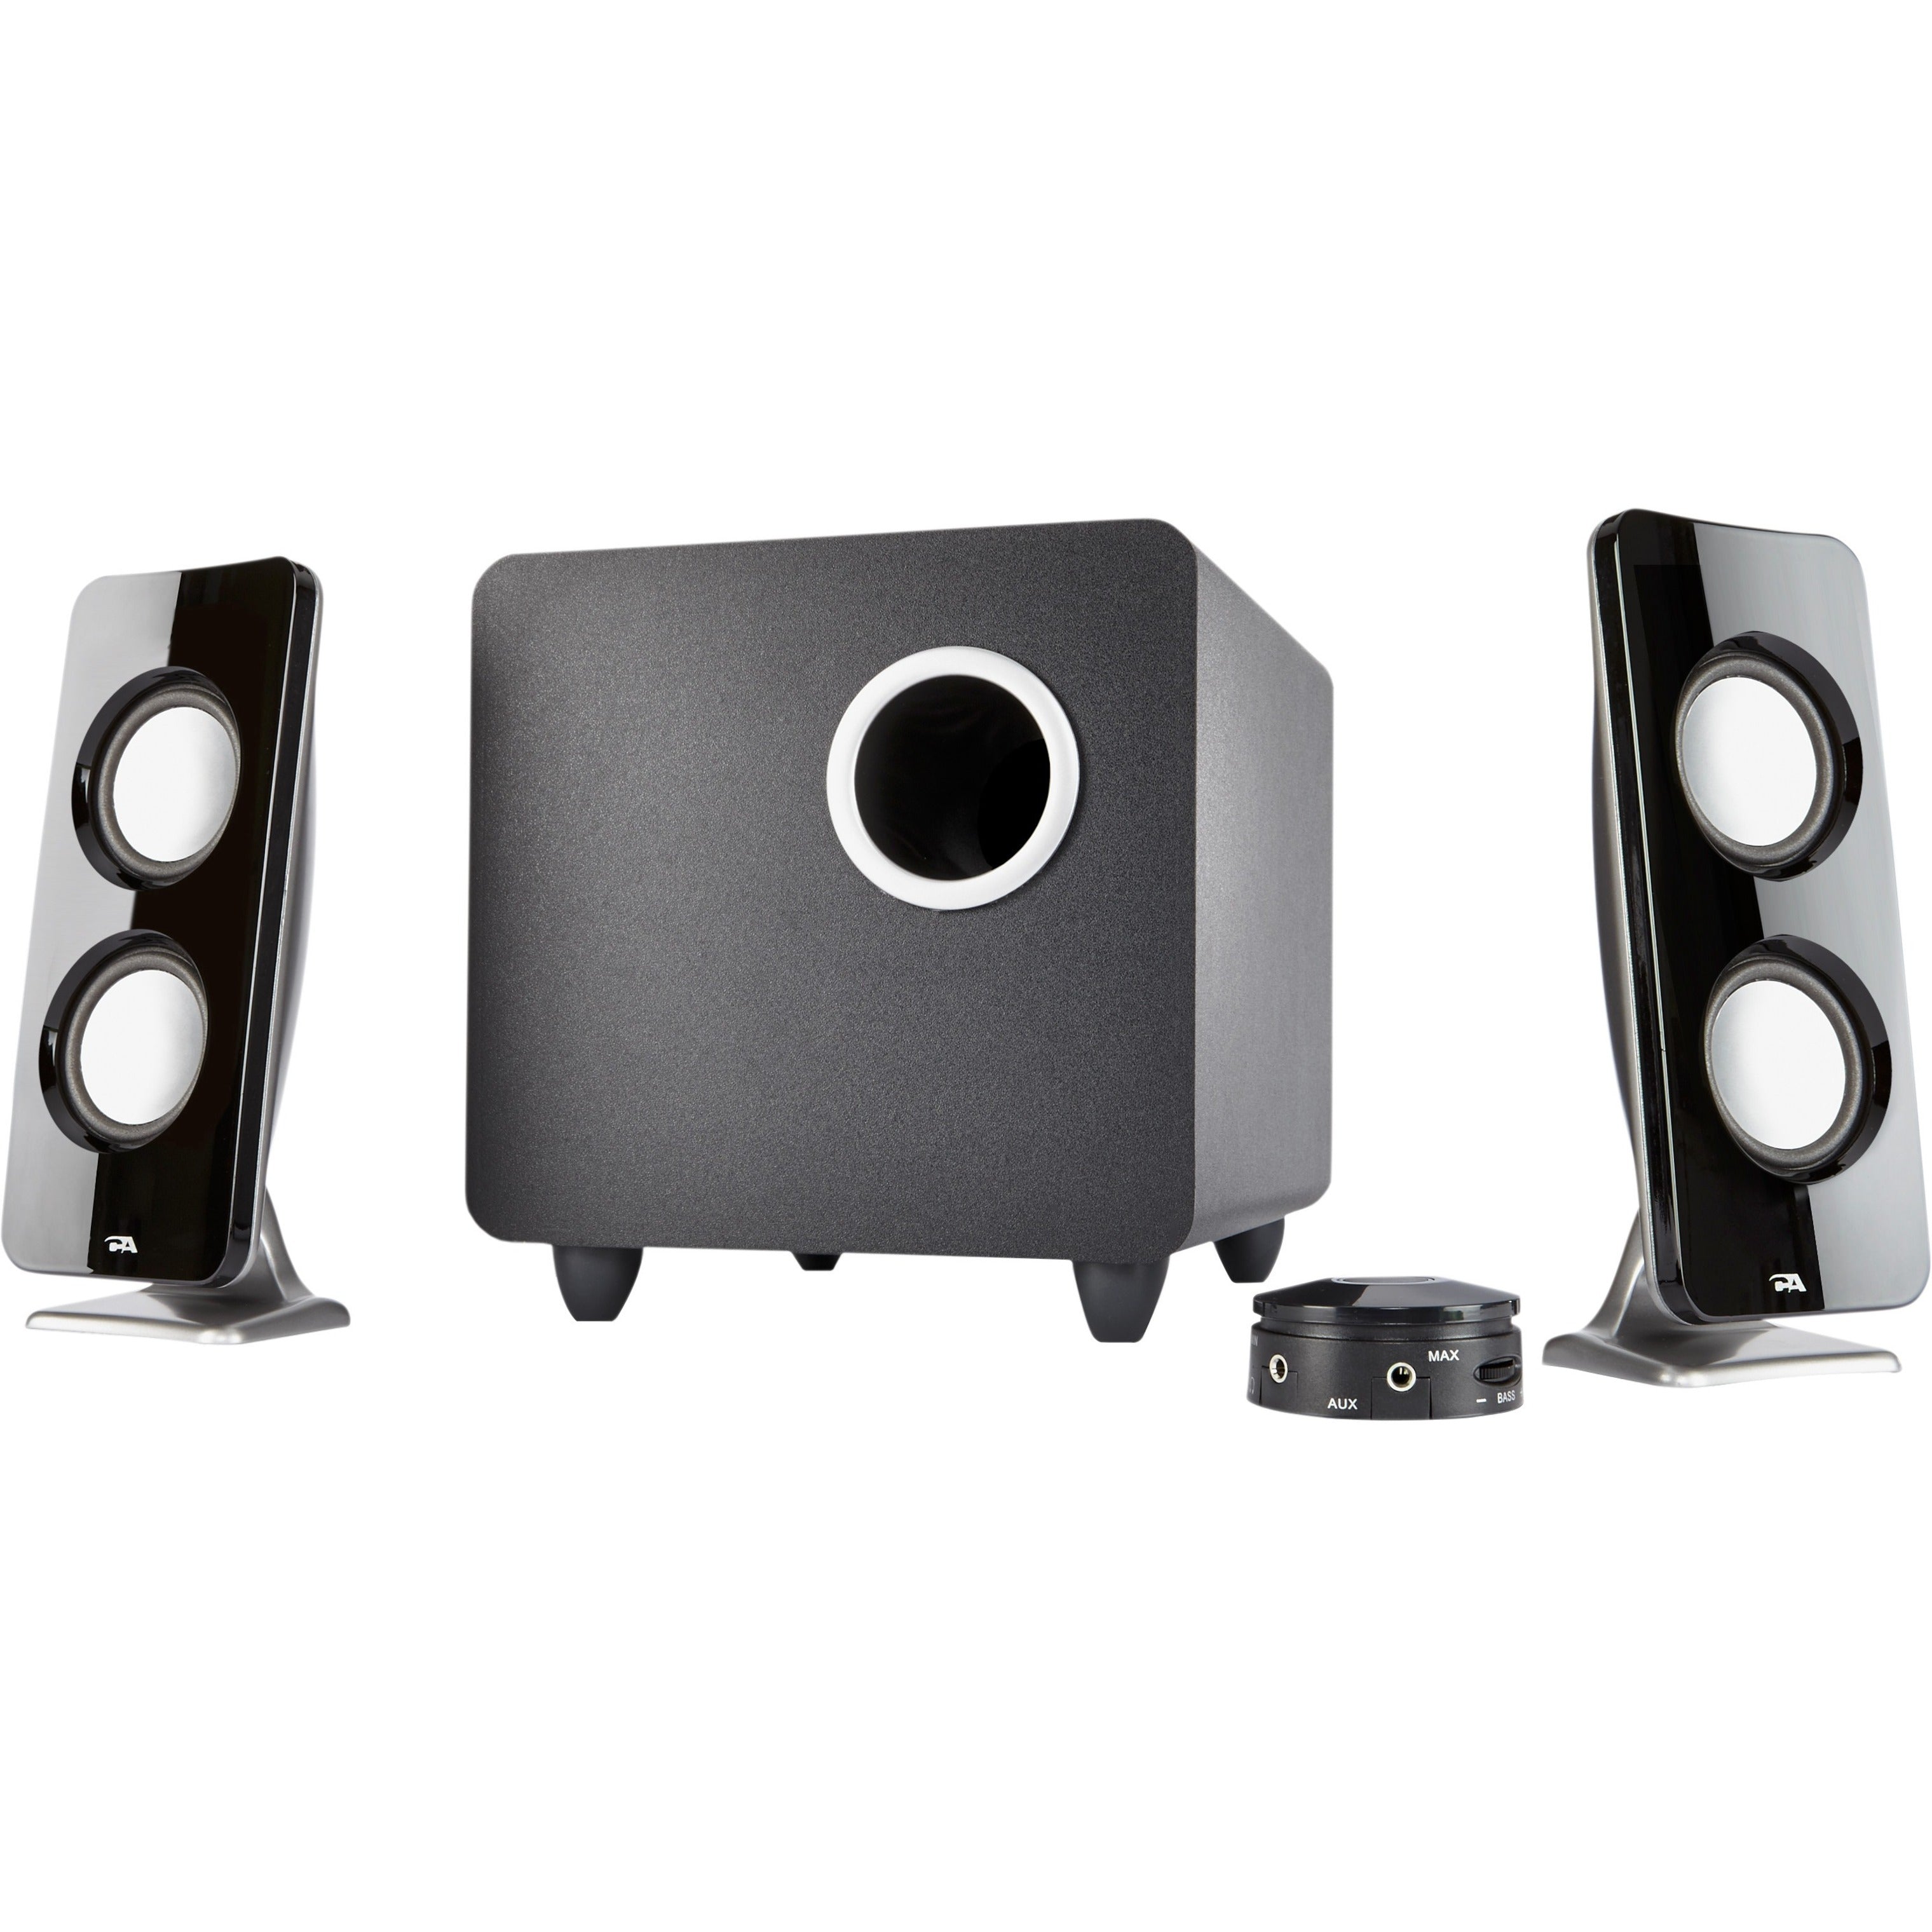 Cyber Acoustics CA-3610 Curve.Immersion 62W Peak Power Speaker System with Control Pod, 2.1 Speaker System - 30 W RMS